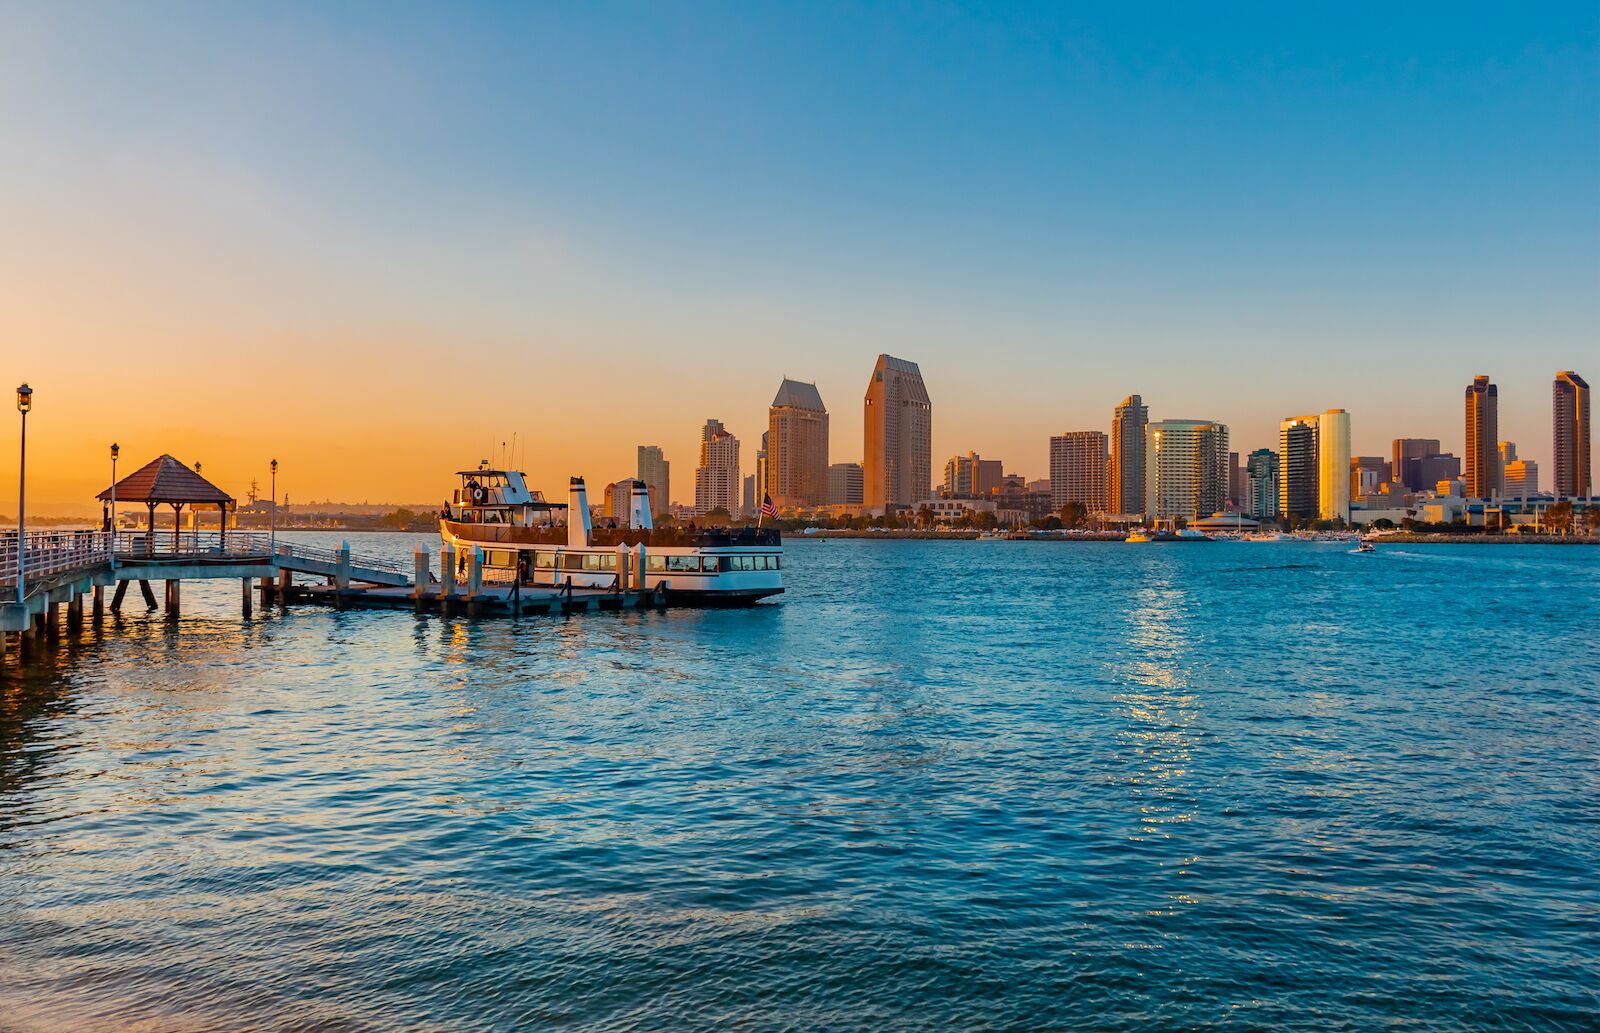 The San Diego skyline with the ferry in the foreground at sunset